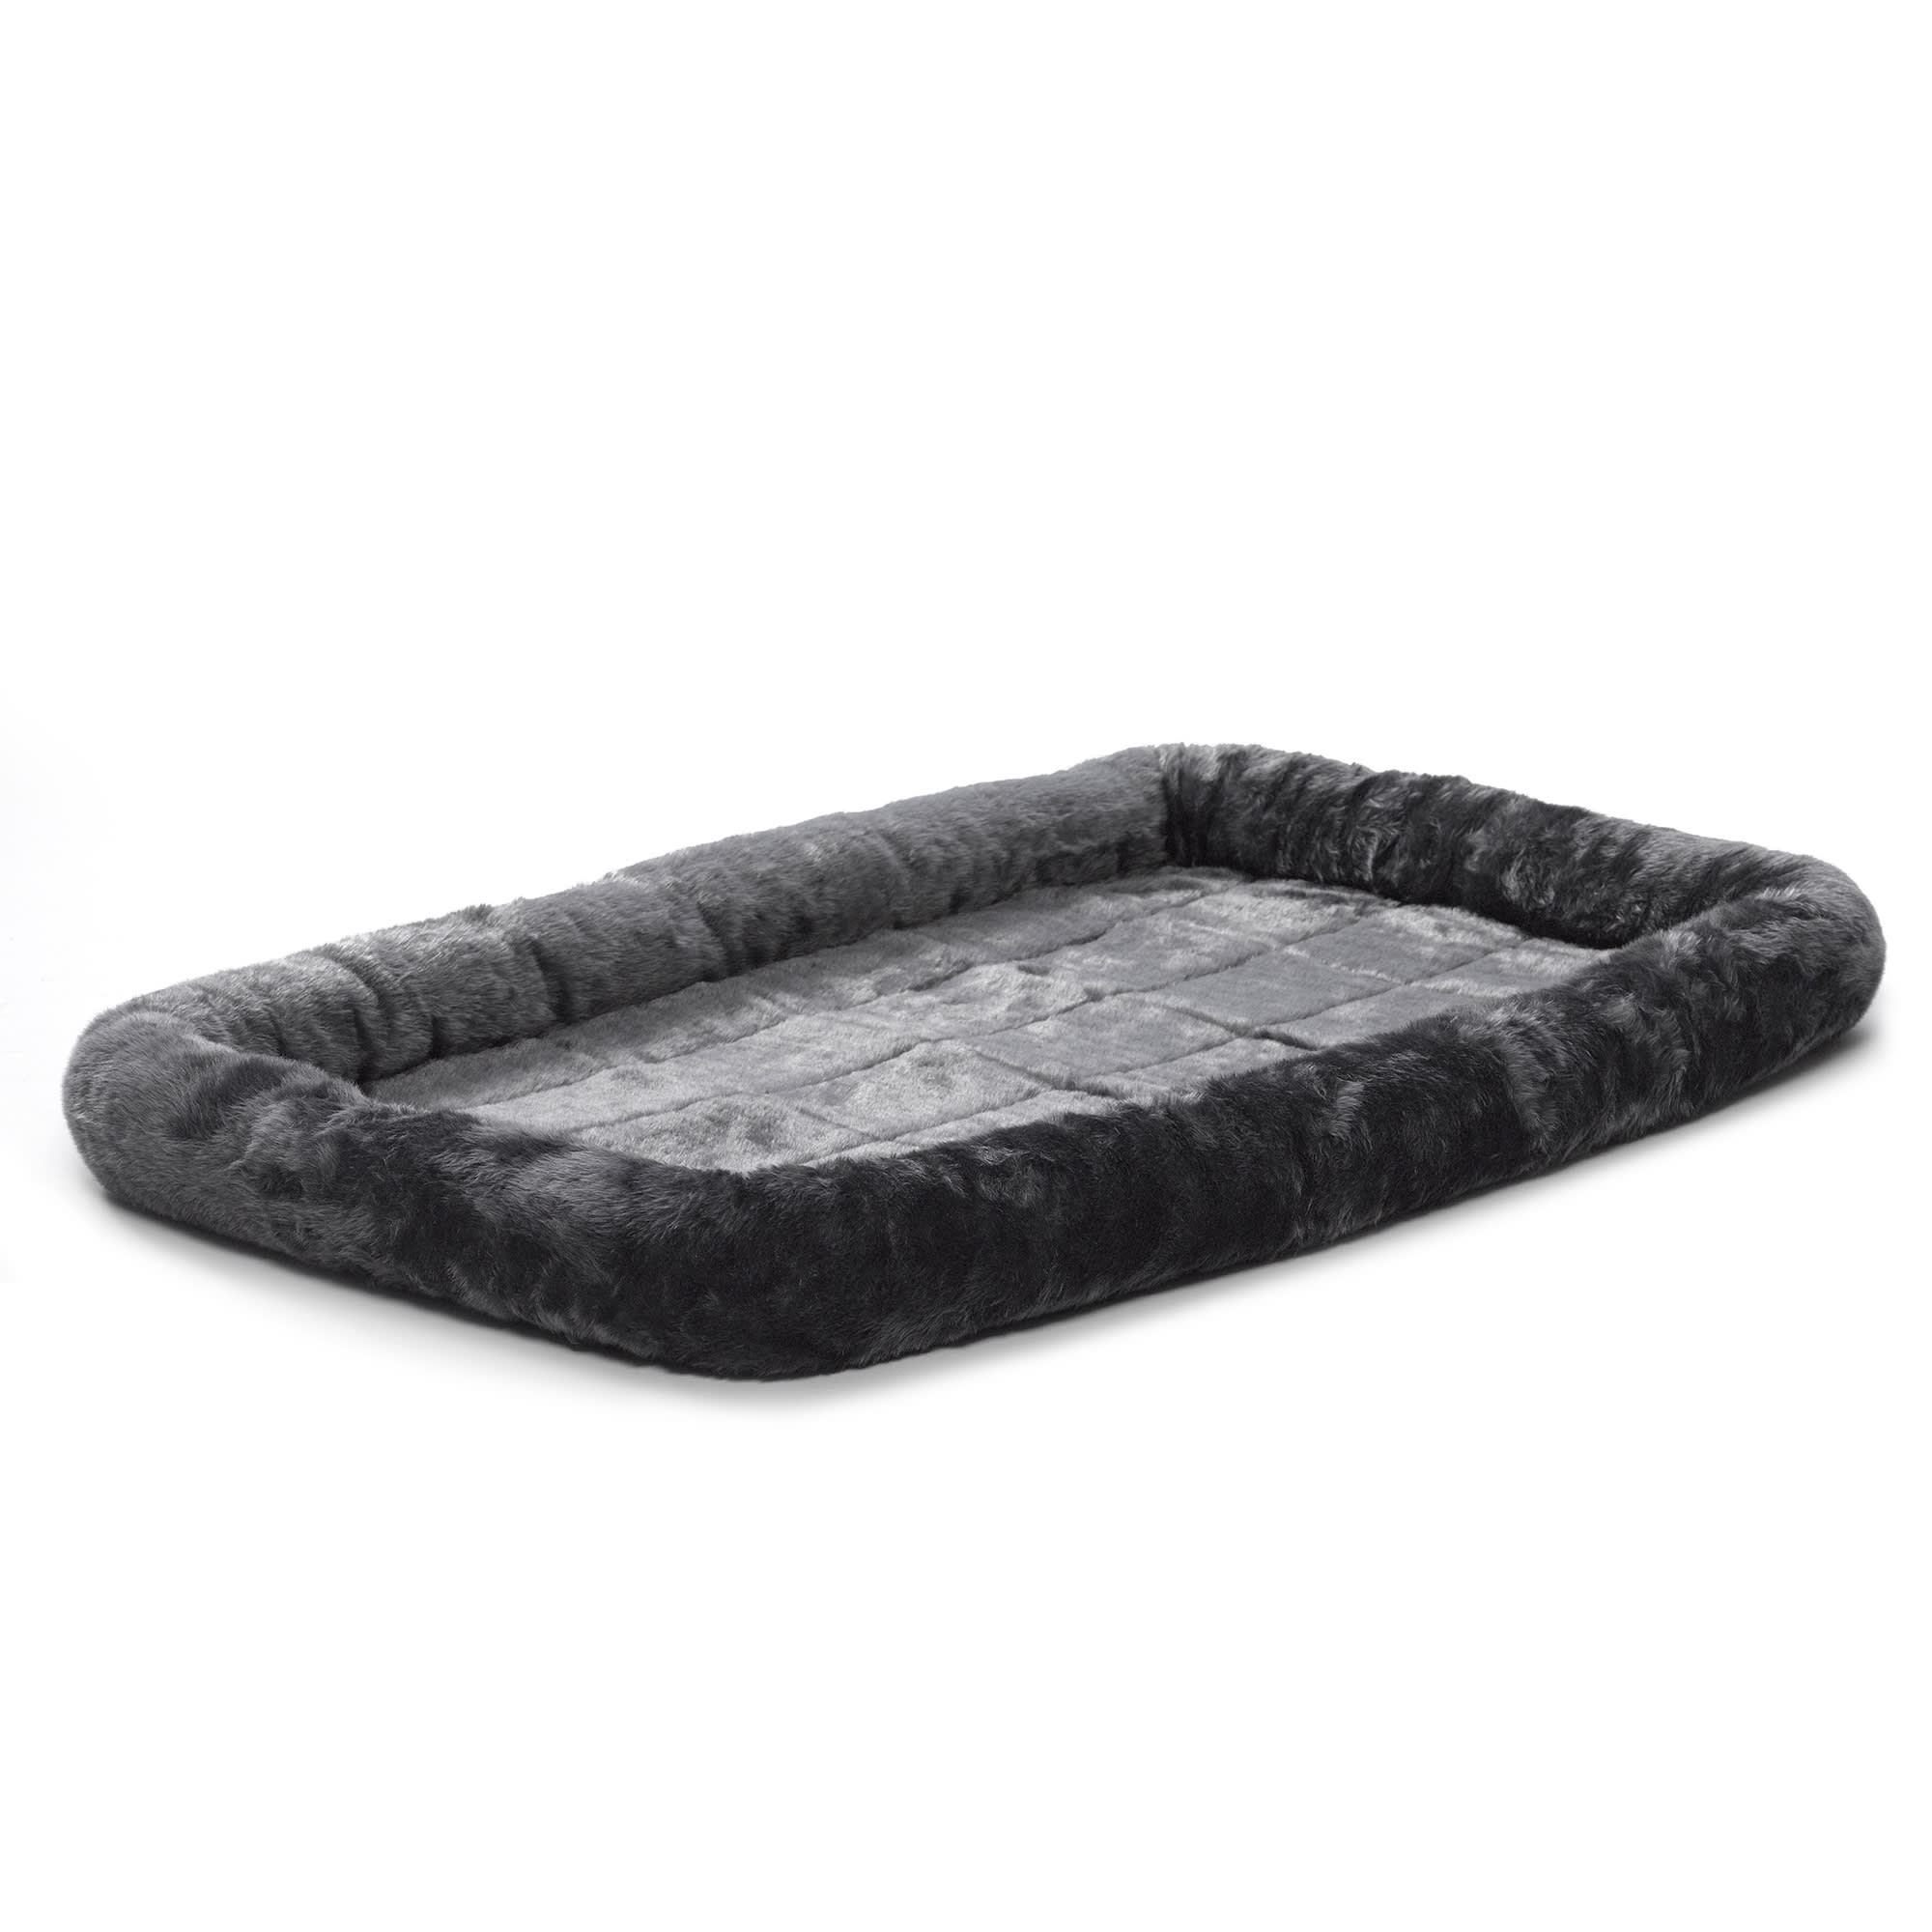 Photos - Dog Bed / Basket Midwest Quiet Time Bolster Gray Dog Bed, 48" L X 30" W, XX-Large, 